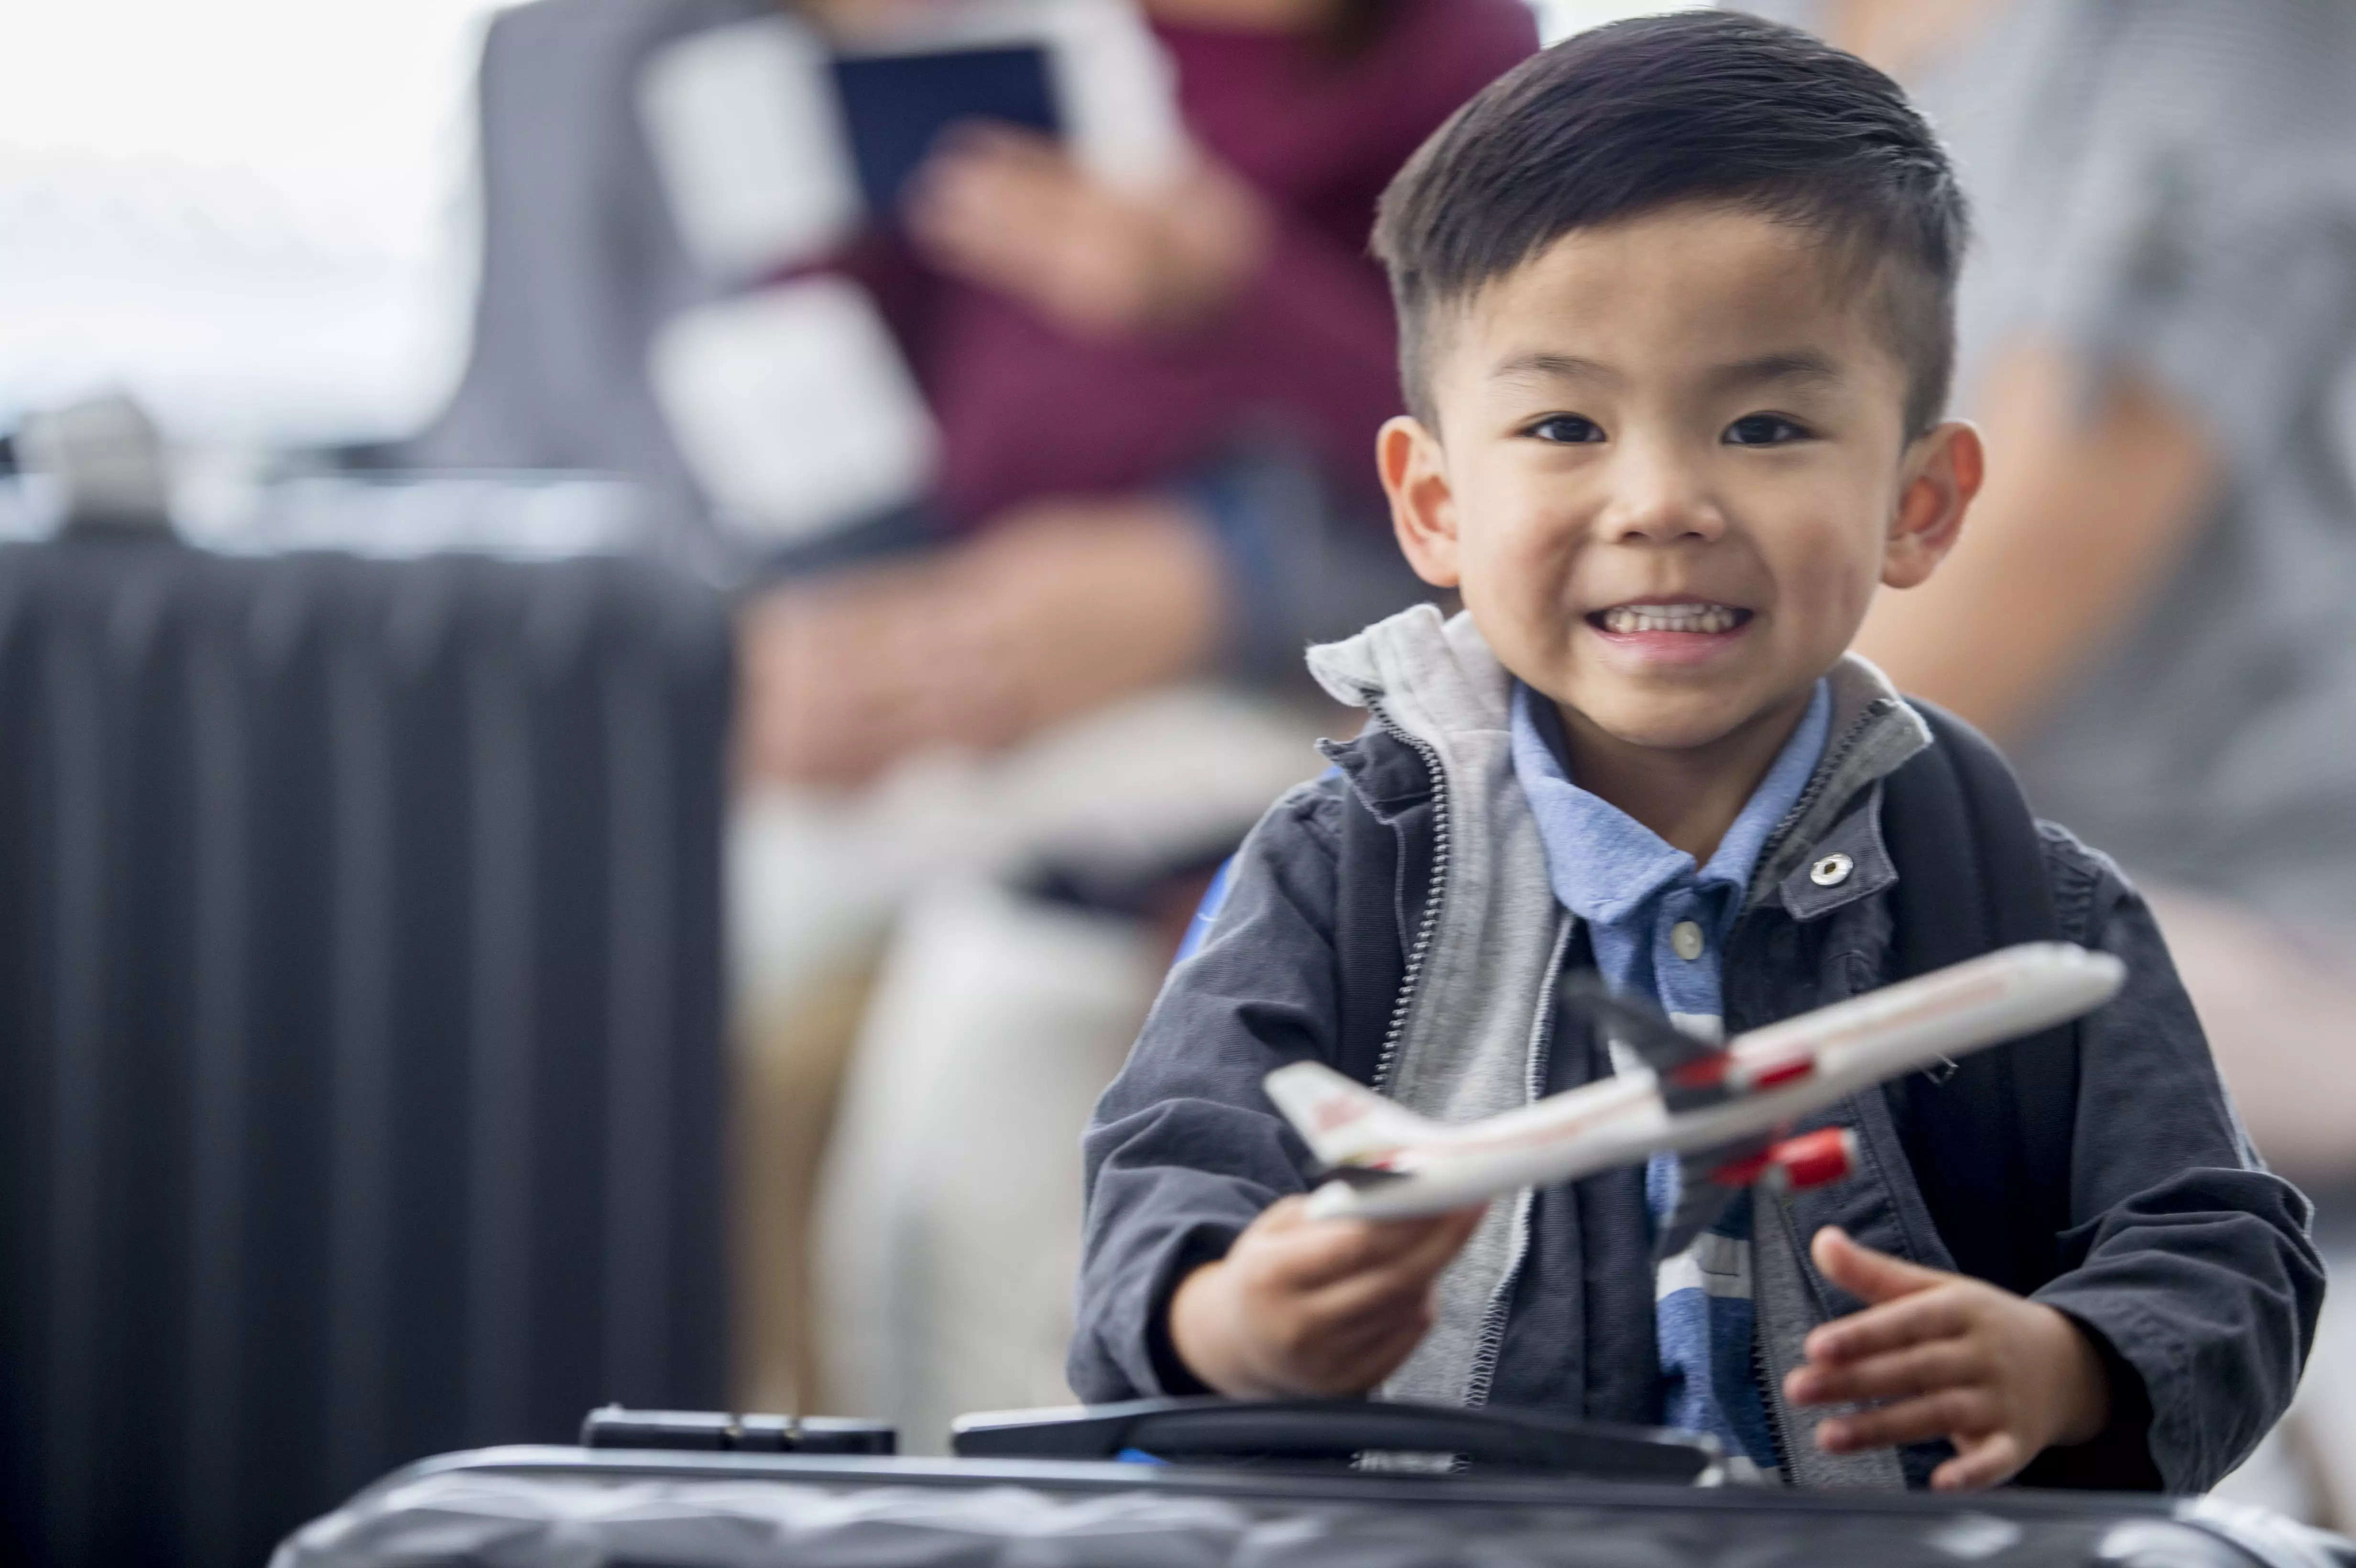 No pre or post-arrival Covid testing for kids, say revised guidelines for international arrivals